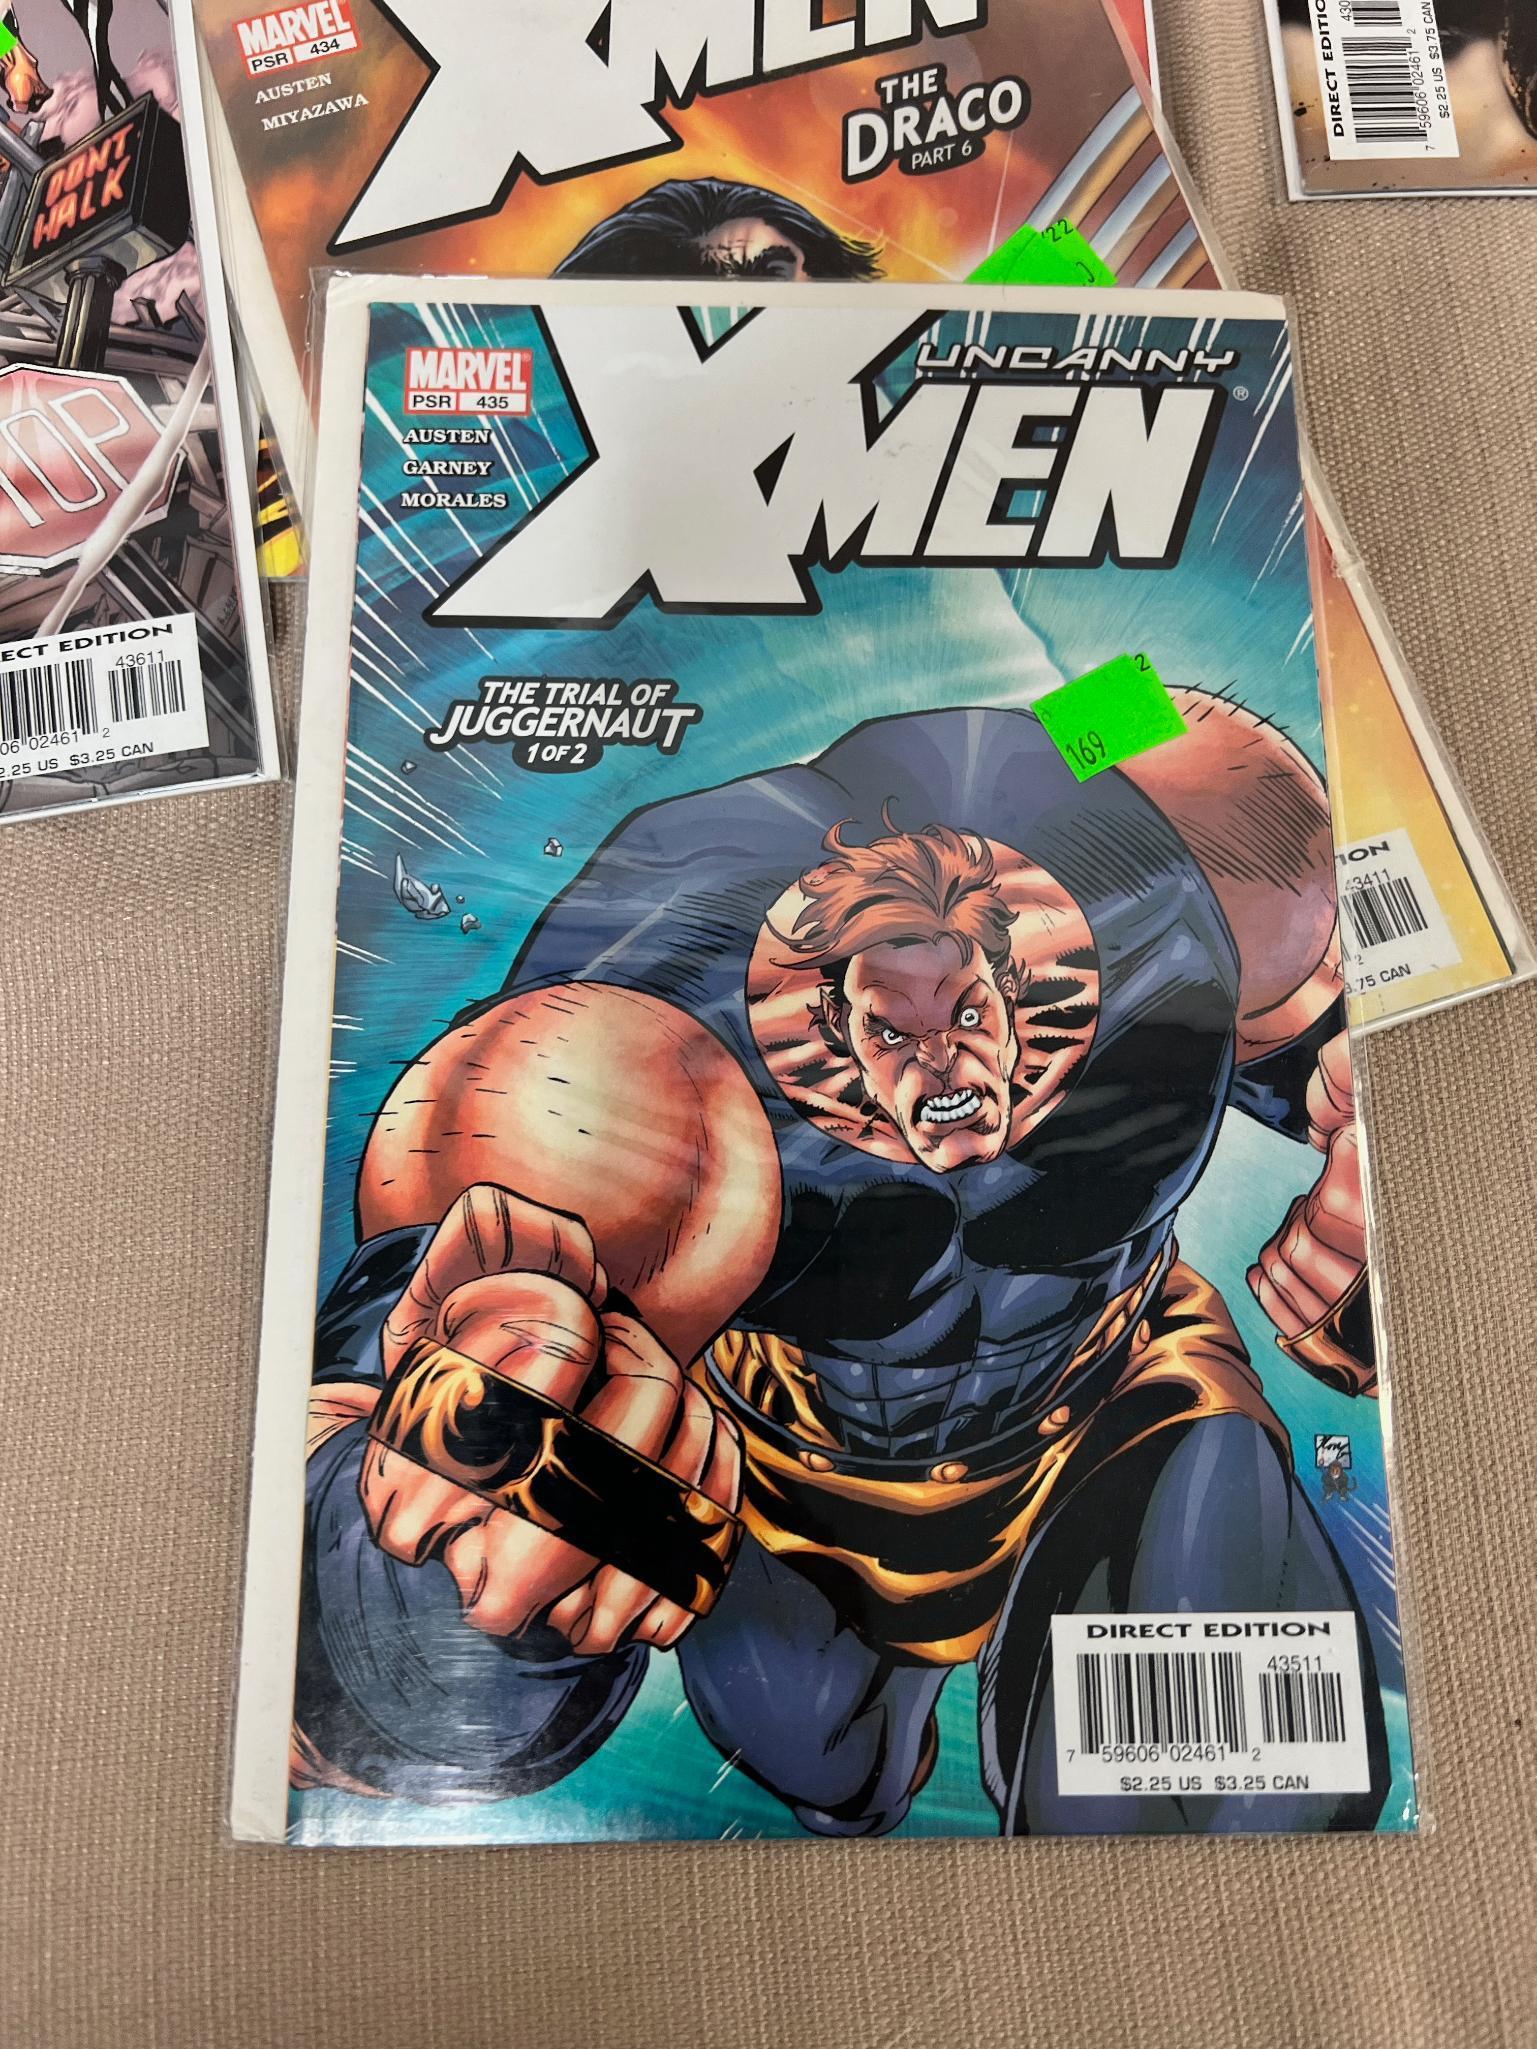 20+ Uncanny X-Men and related Comic Books issues 424- 436, some dups, some gaps, see pics